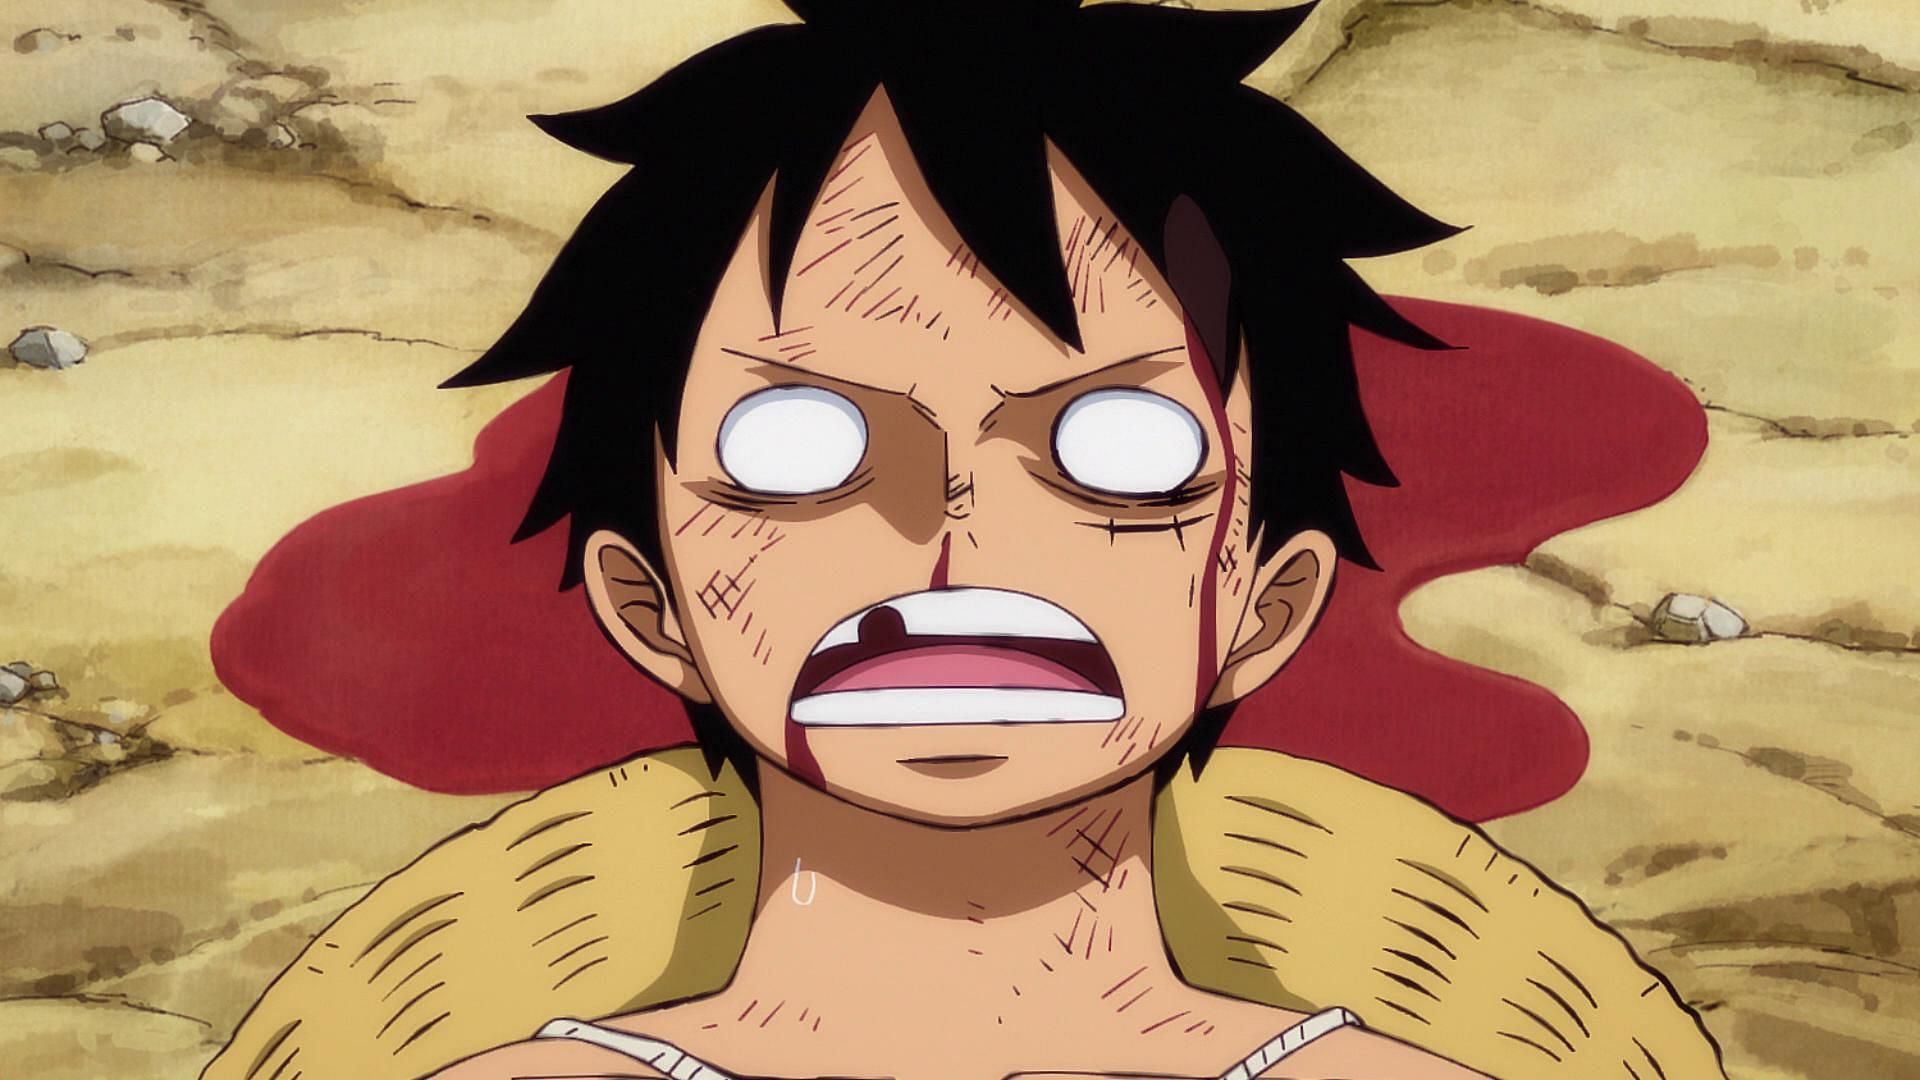 Many fans are showing legitimate concern for Luffy&#039;s health given recent leaks (Image Credits: Eiichiro Oda/Shueisha, Viz Media, One Piece)